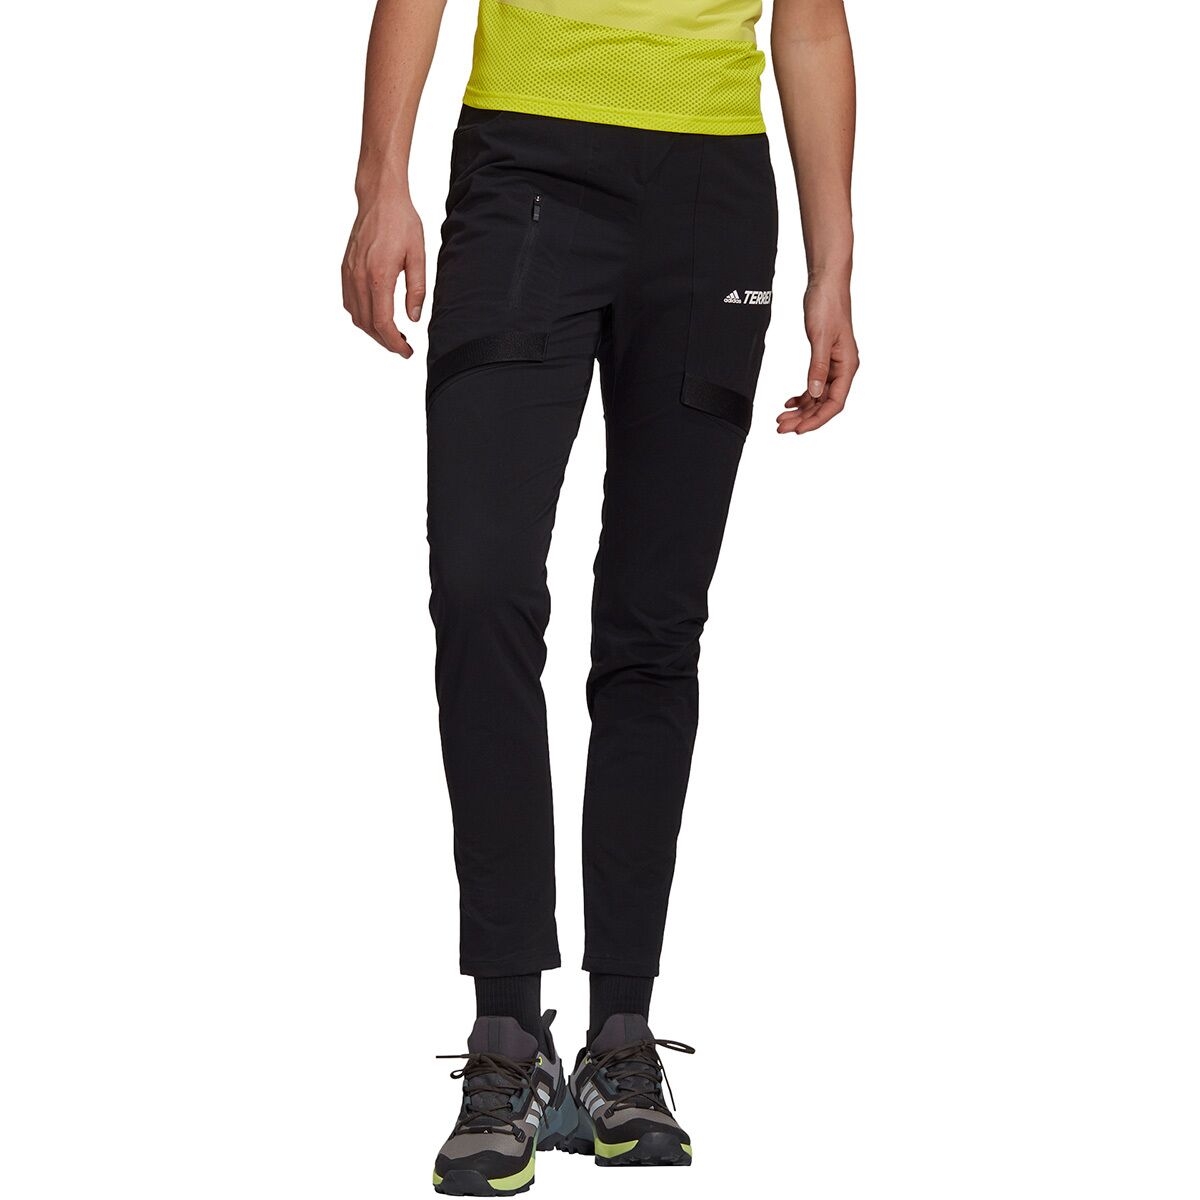 Adidas Outdoor Zupahike Pant - Women's